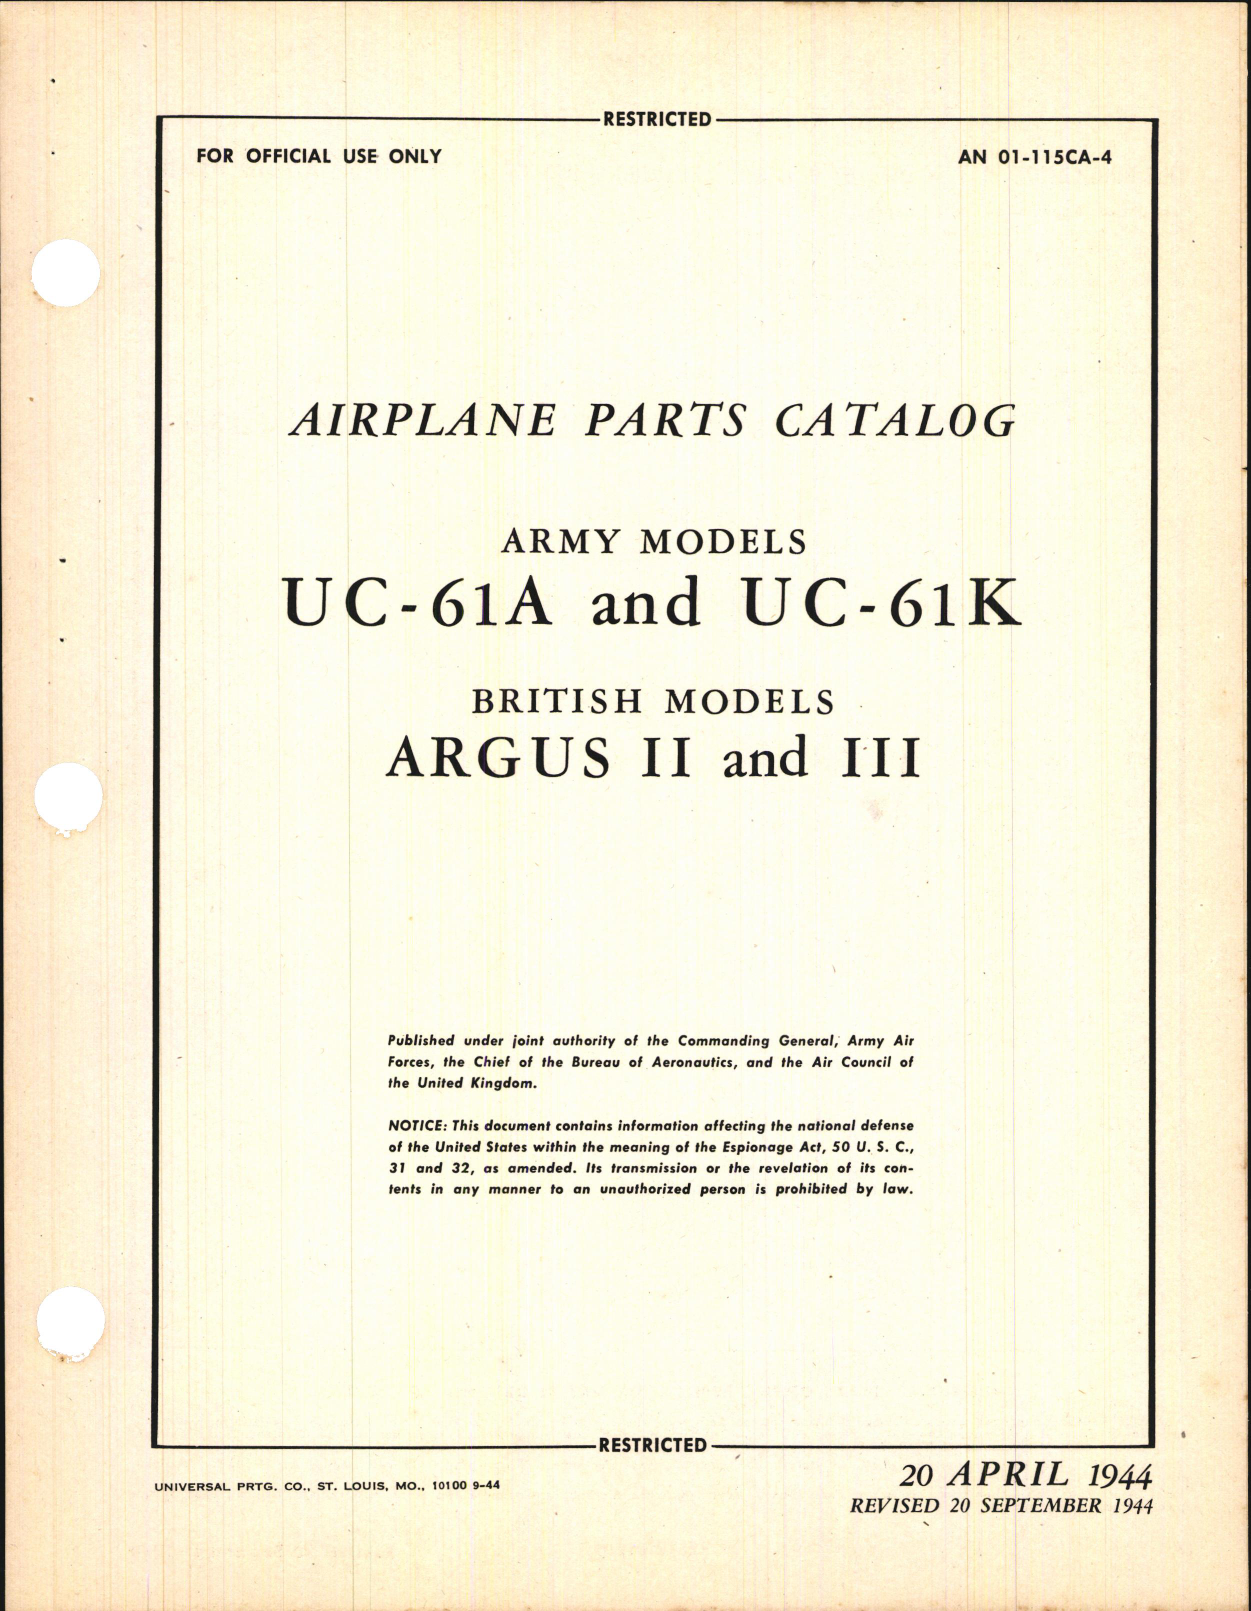 Sample page 1 from AirCorps Library document: Airplane Parts Catalog for UC-61A and UC-61K